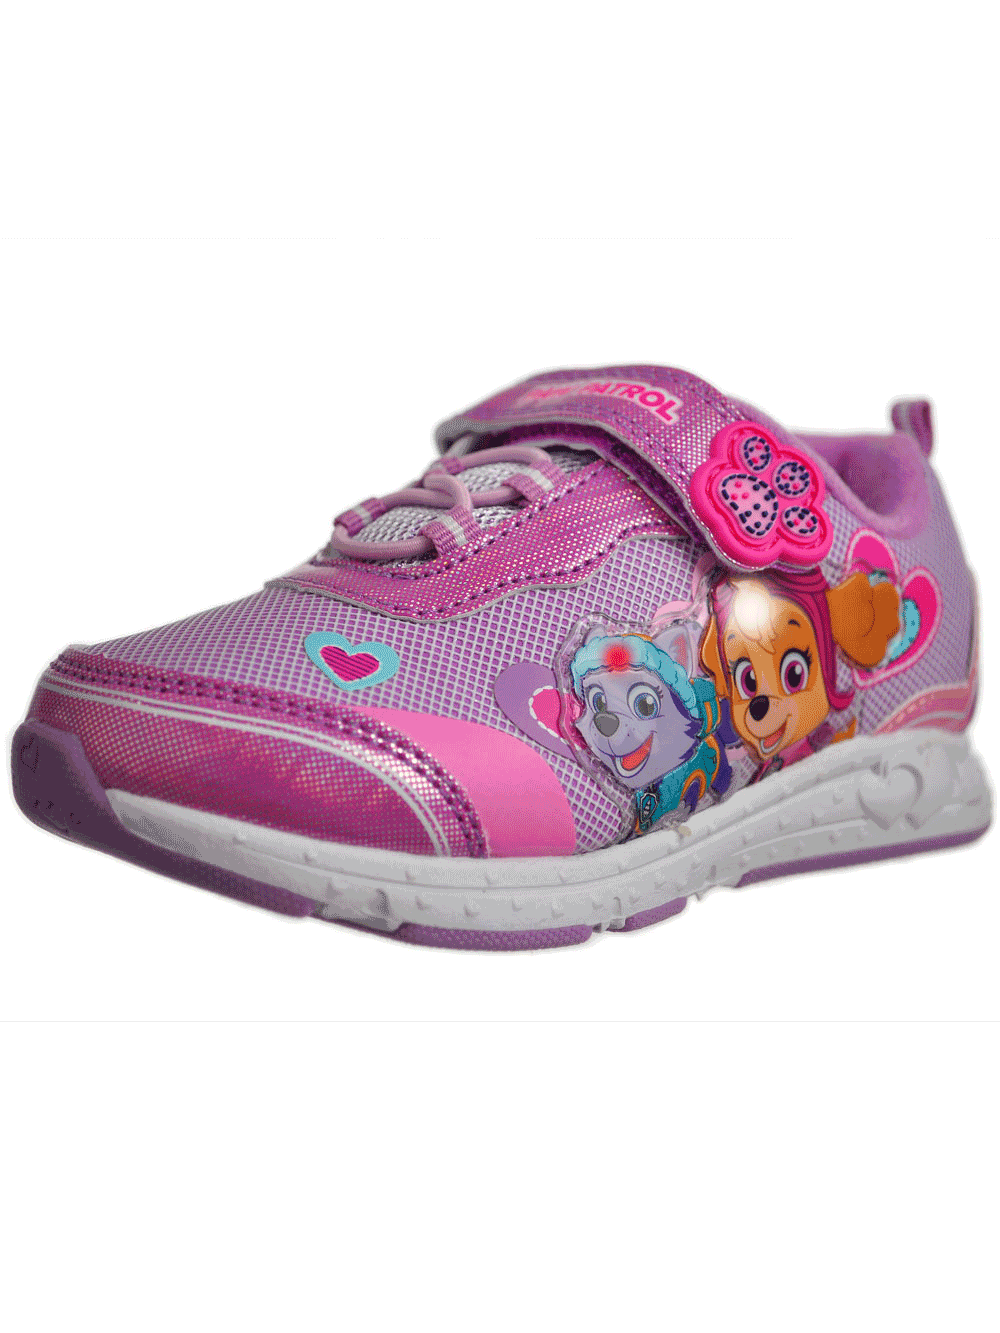 Girls' Light-Up Sneakers by Paw Patrol 